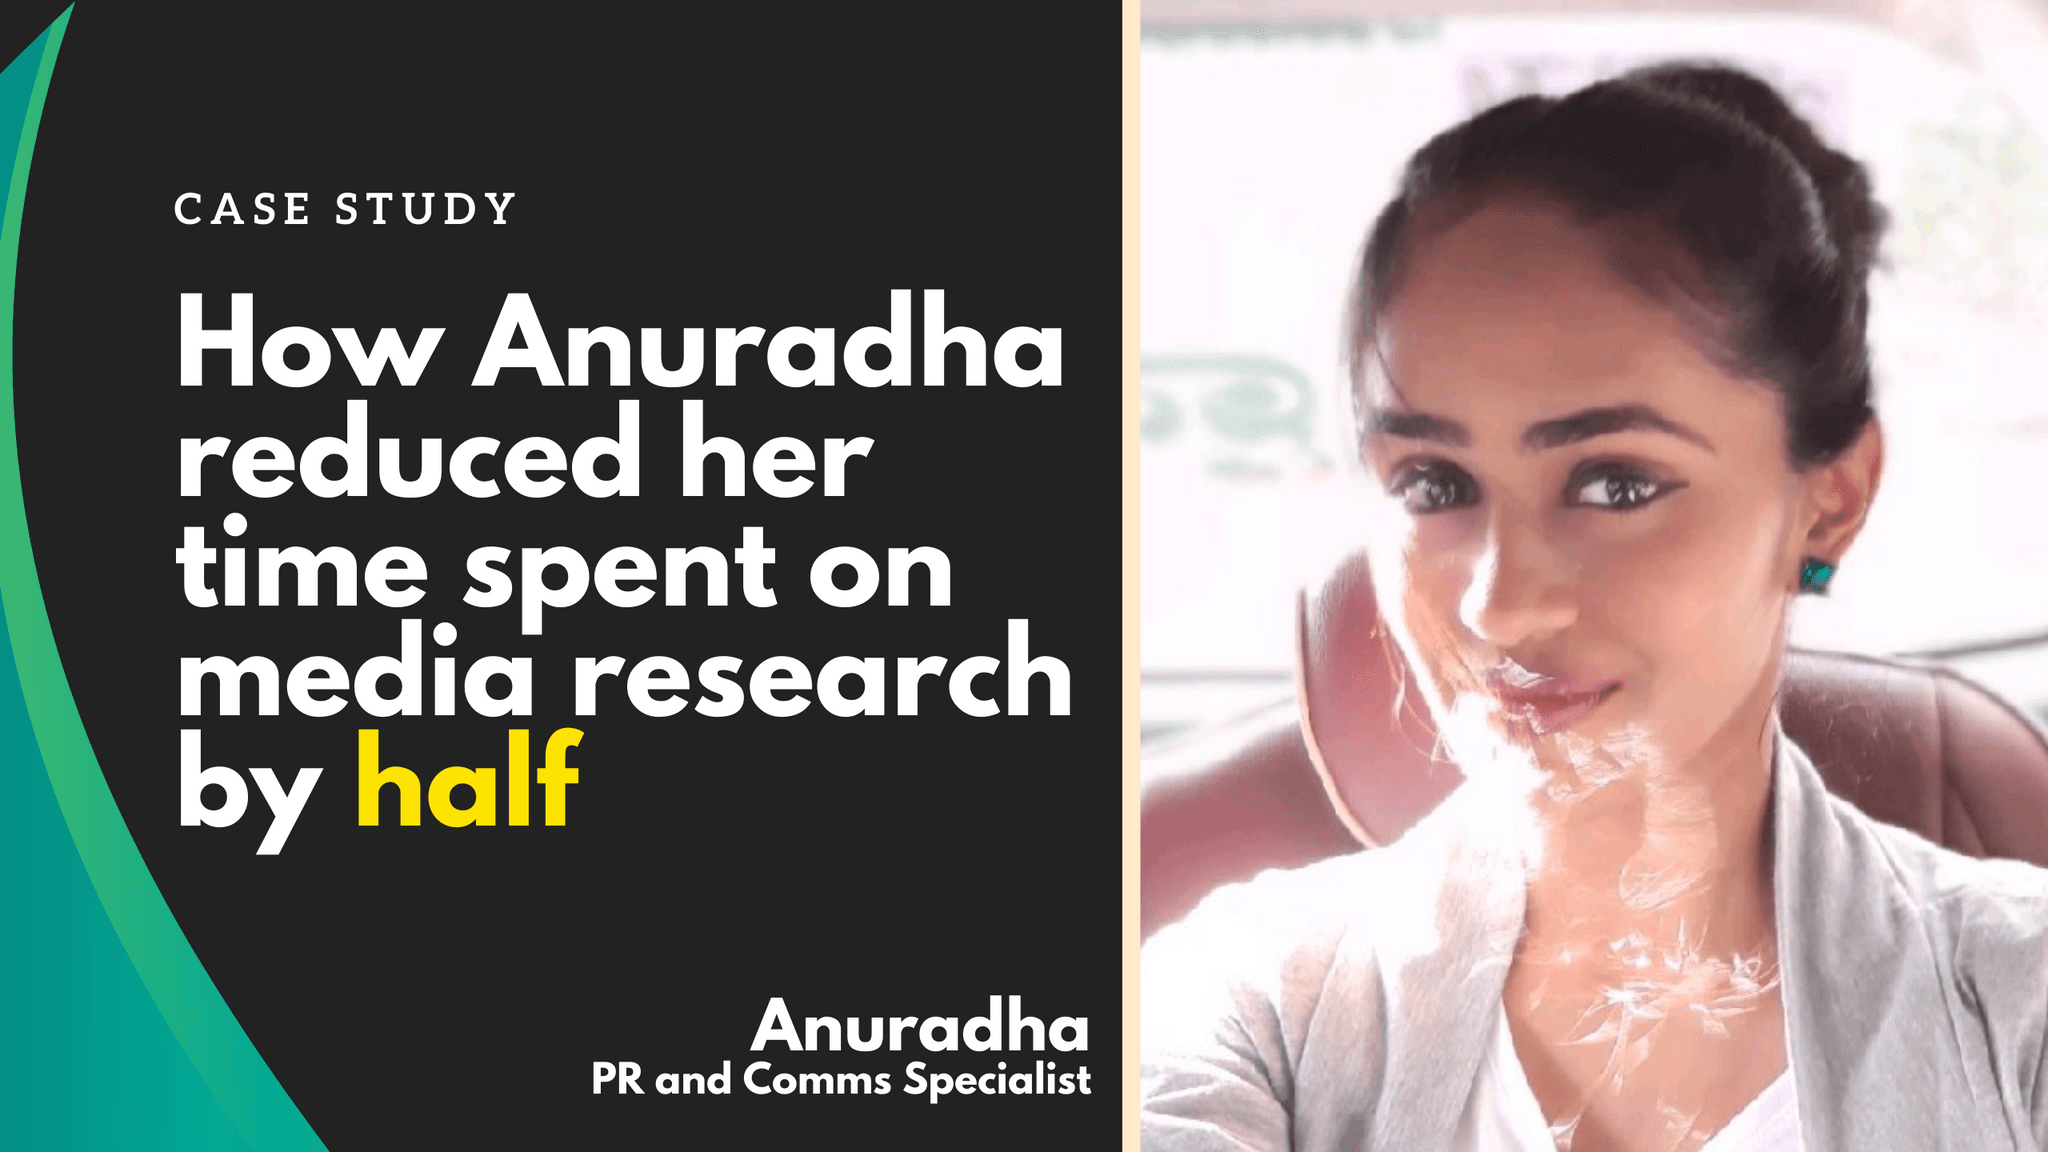 How Anuradha, a PR Specialist reduced time spent on media research by half and got 3X media responses